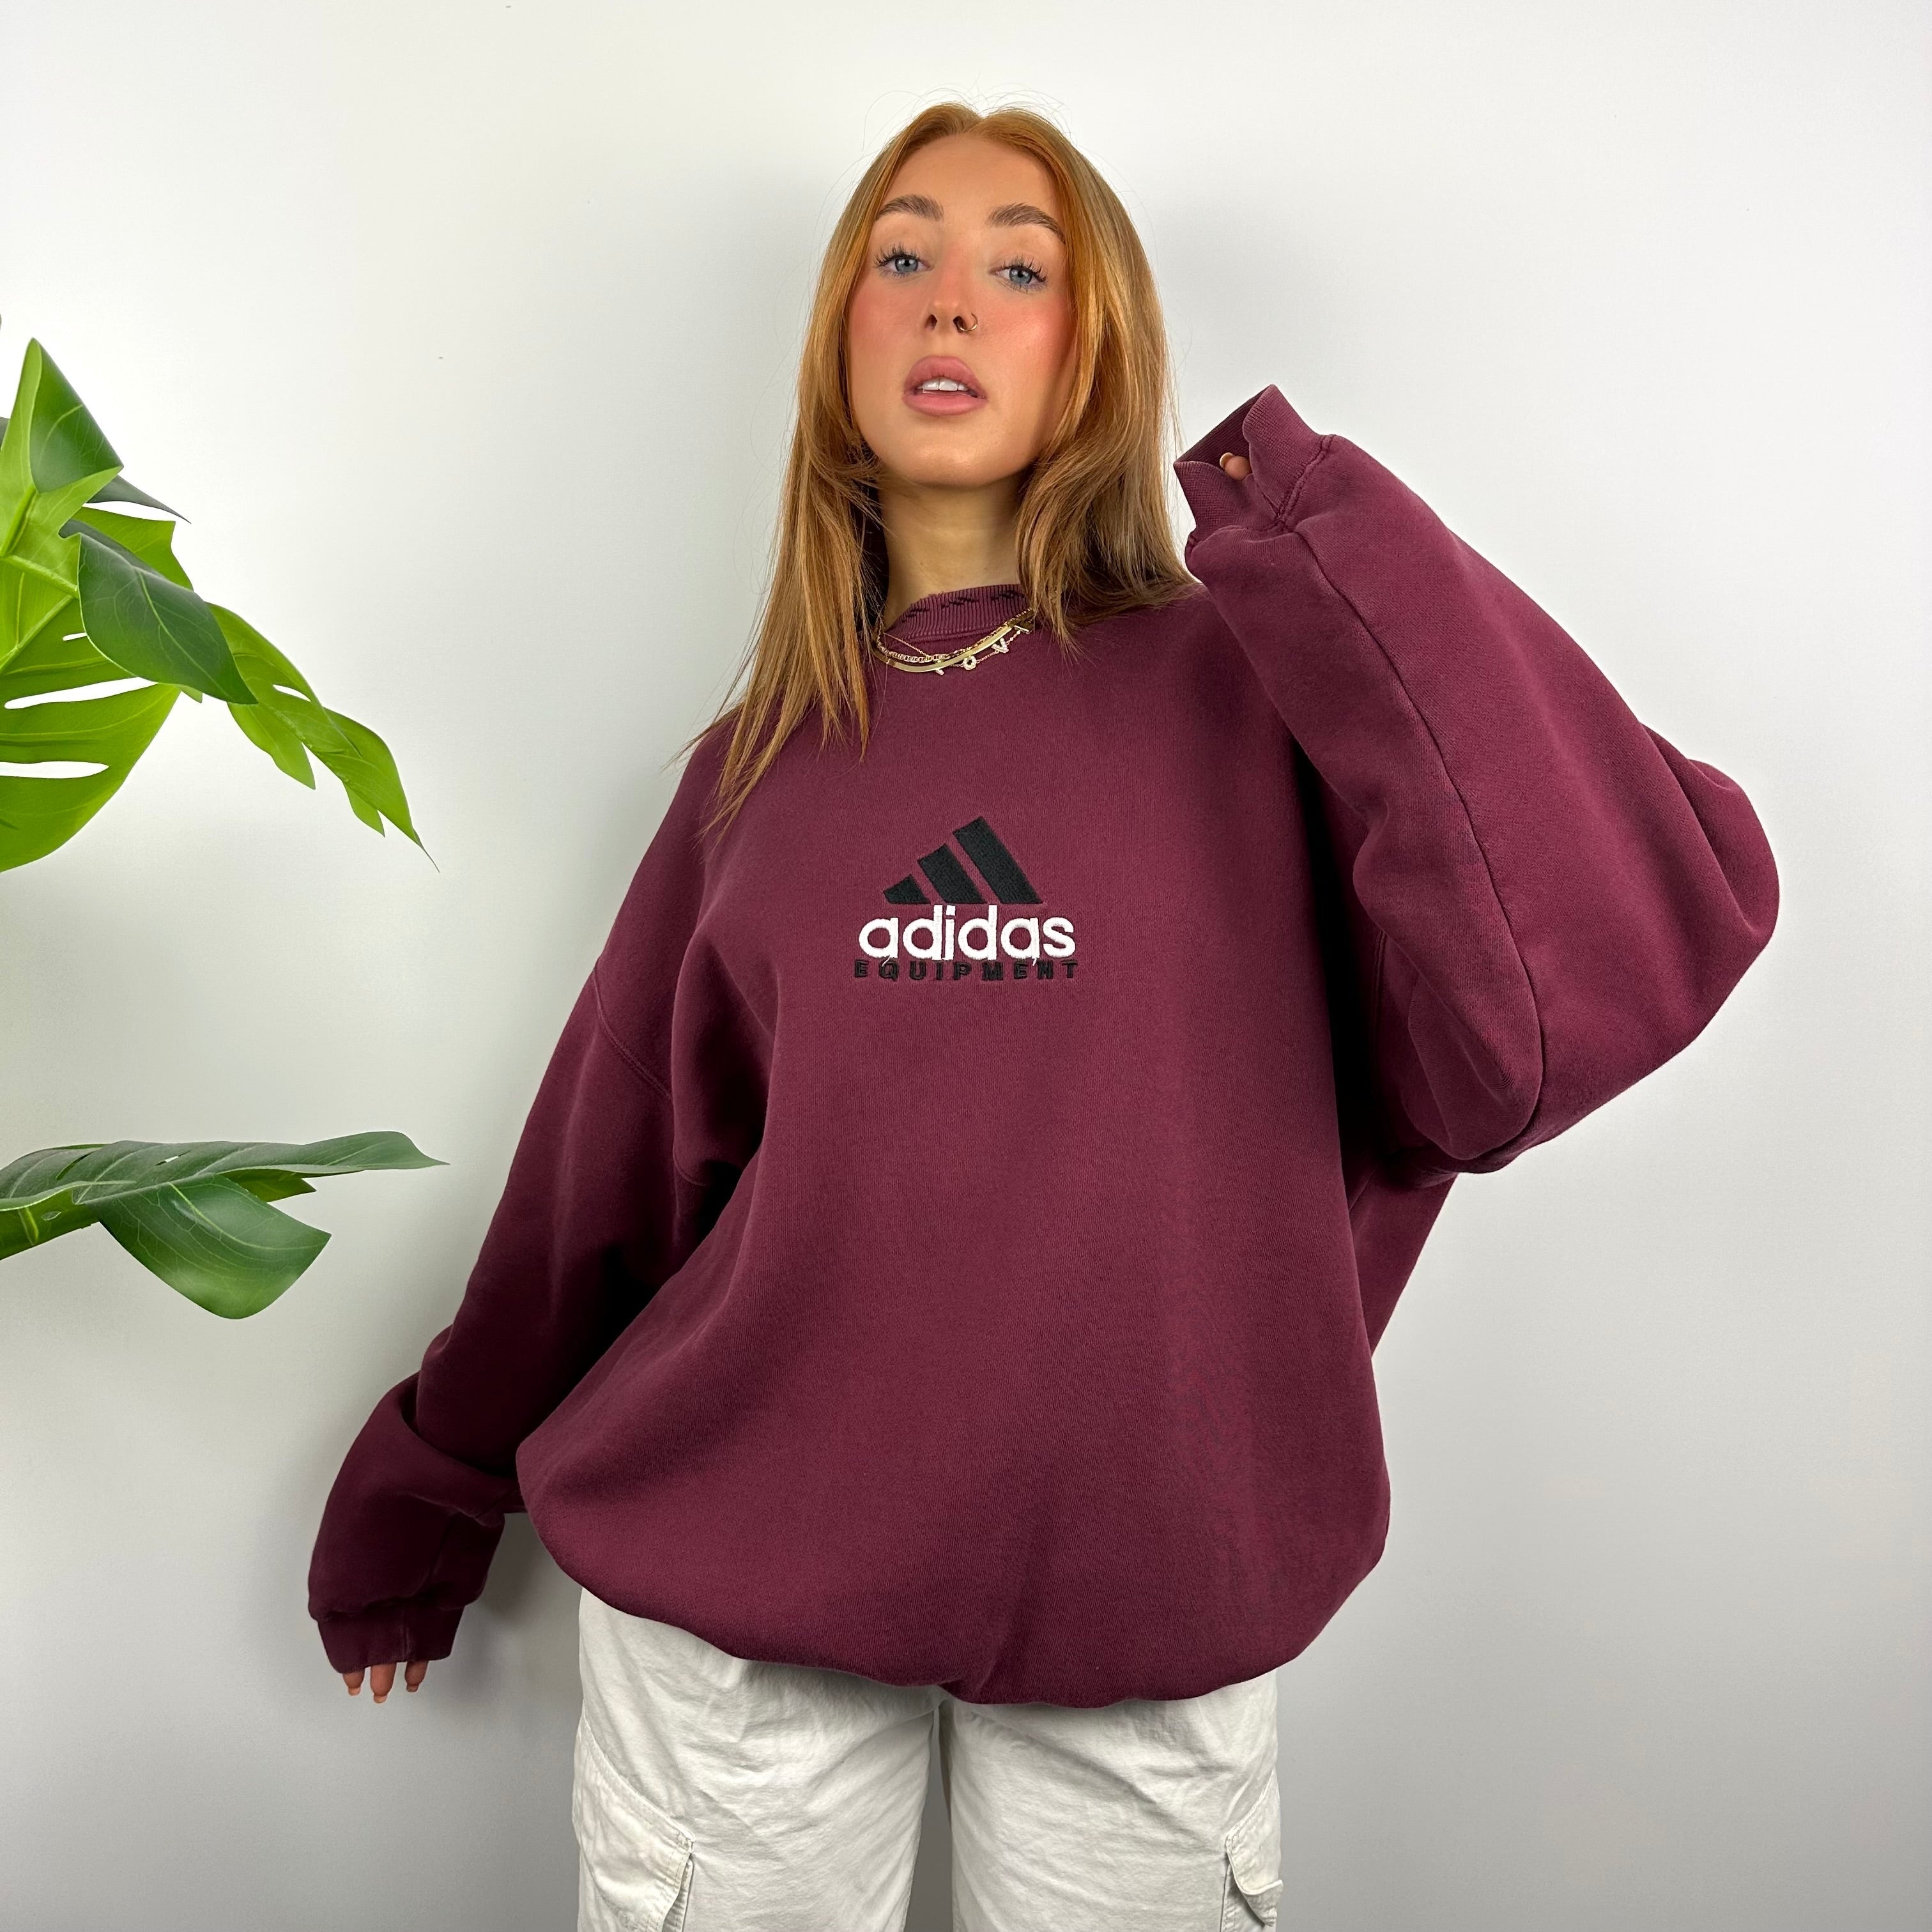 Adidas Equipment Maroon Embroidered Spell Out Sweatshirt (L)